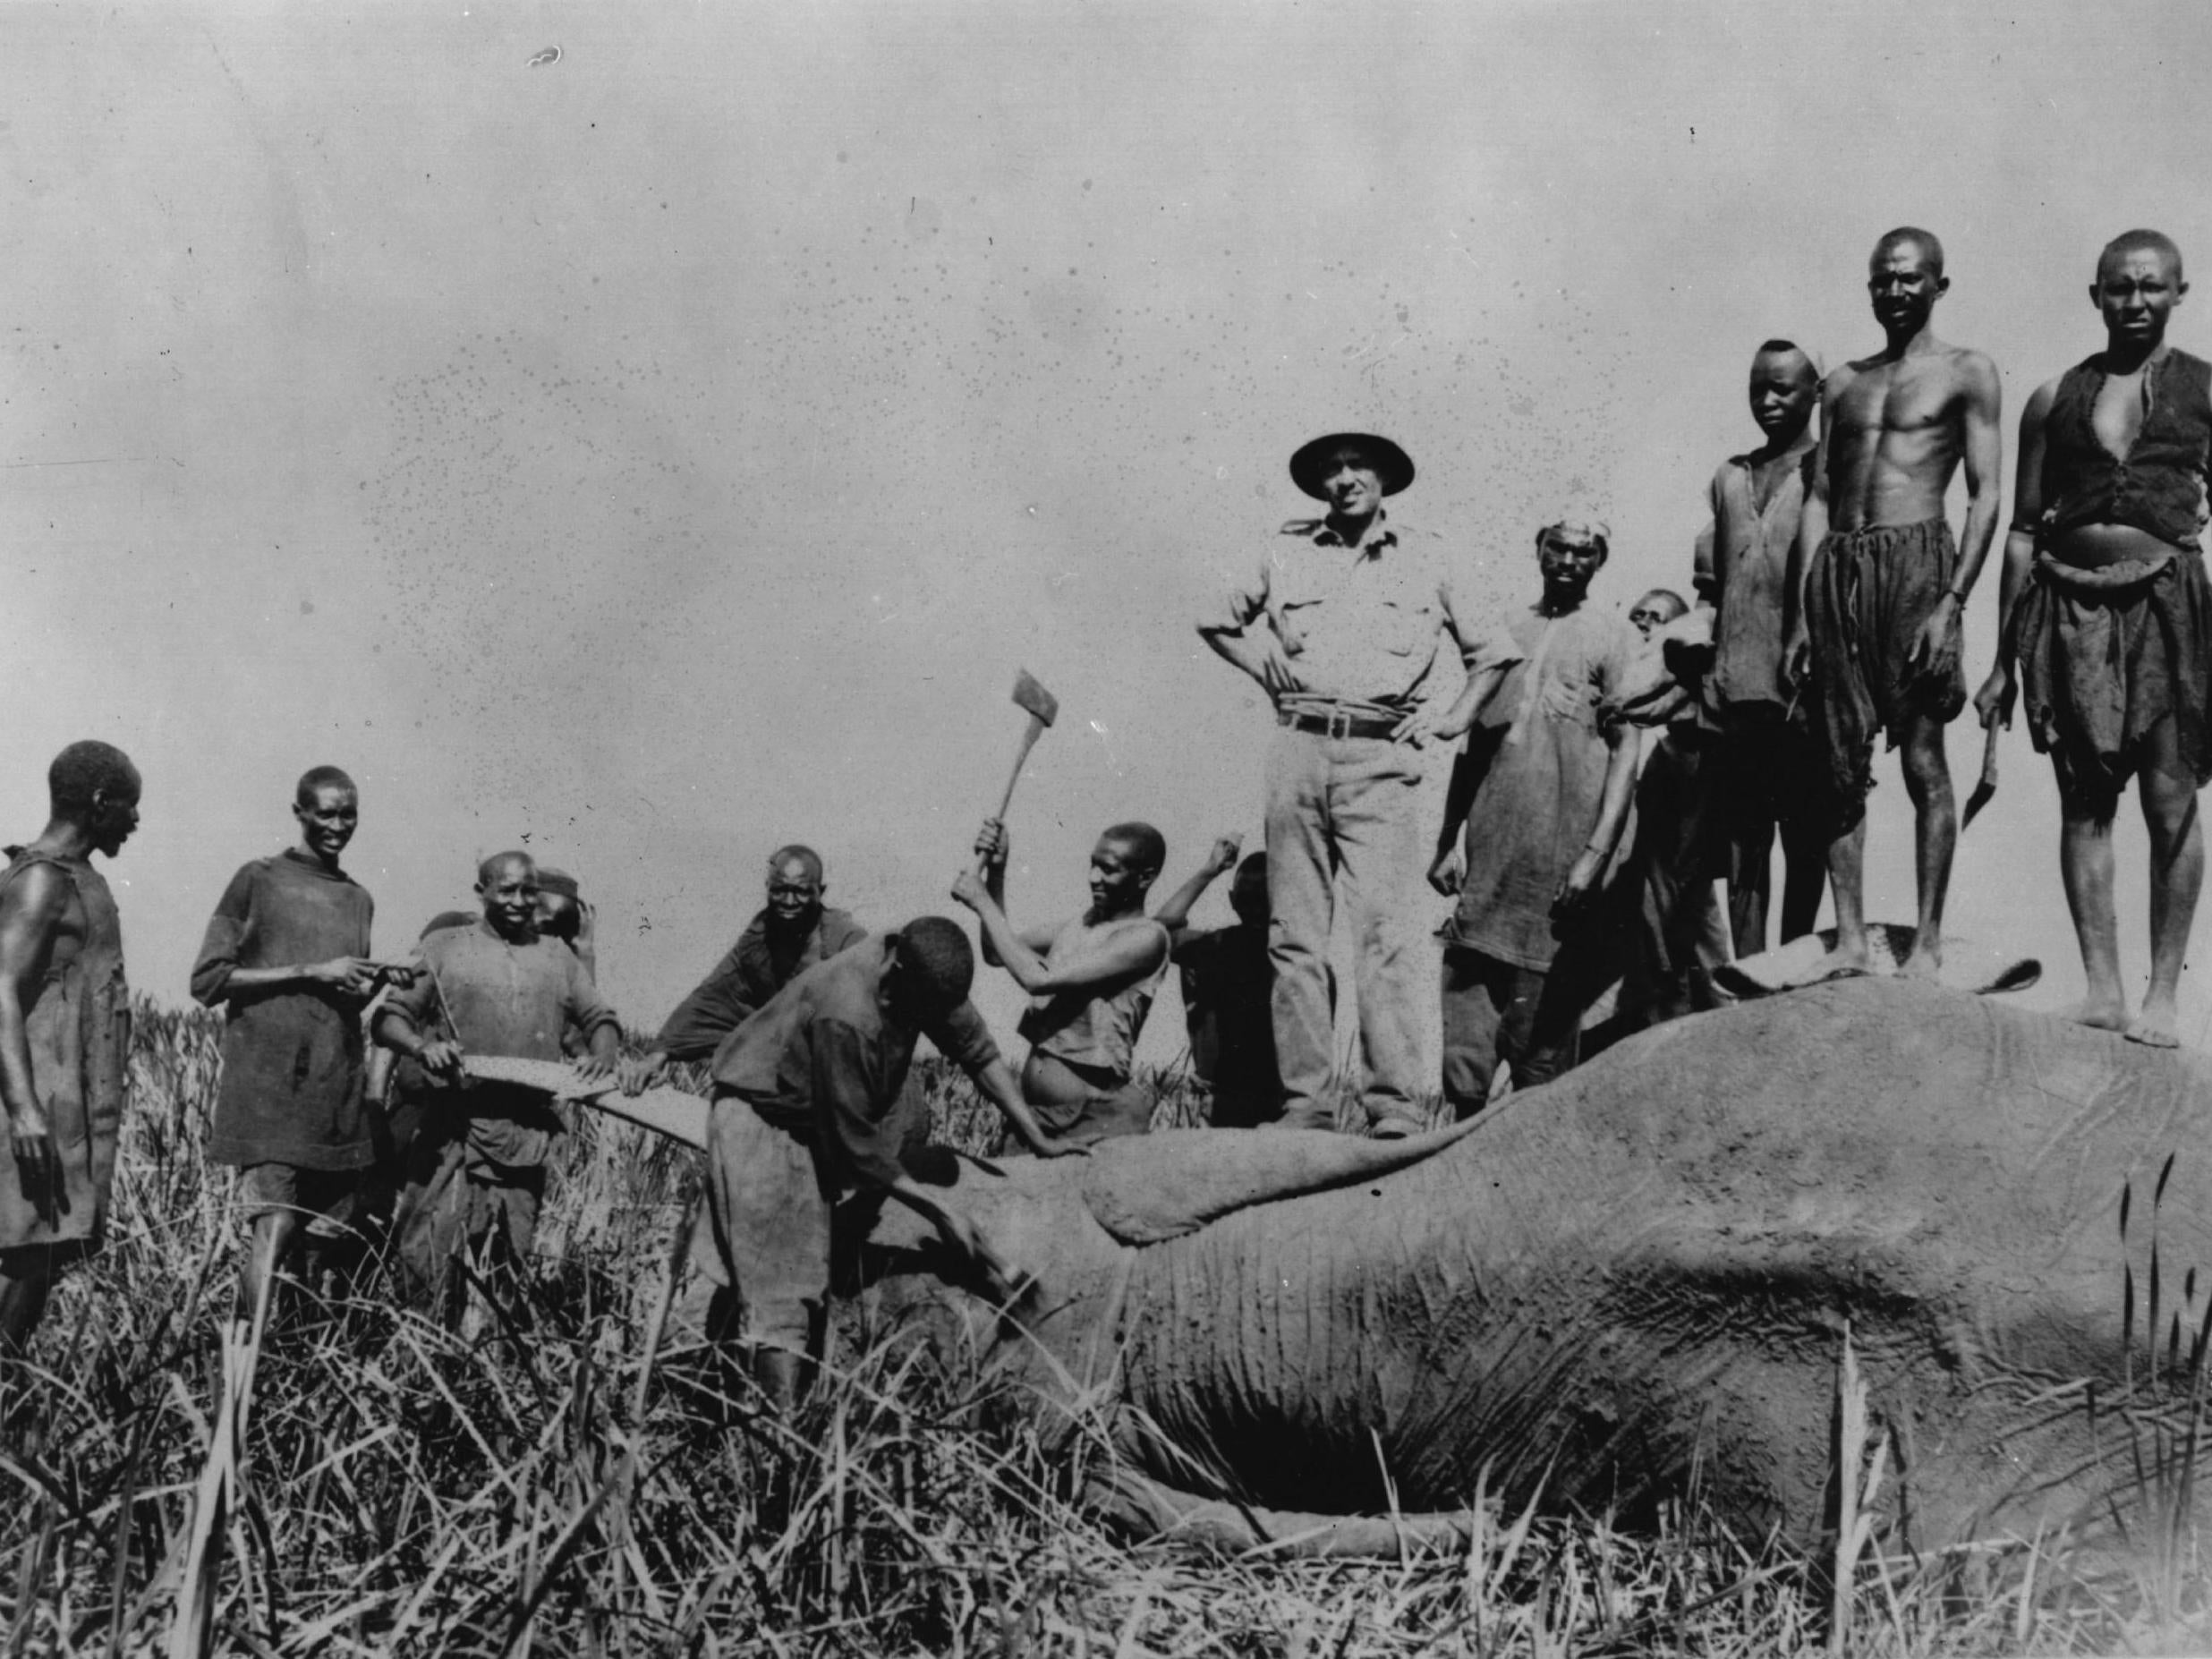 A hunting party in 1933 chopping the tusks off an elephant while others stand on the body - part of the West's colonial past